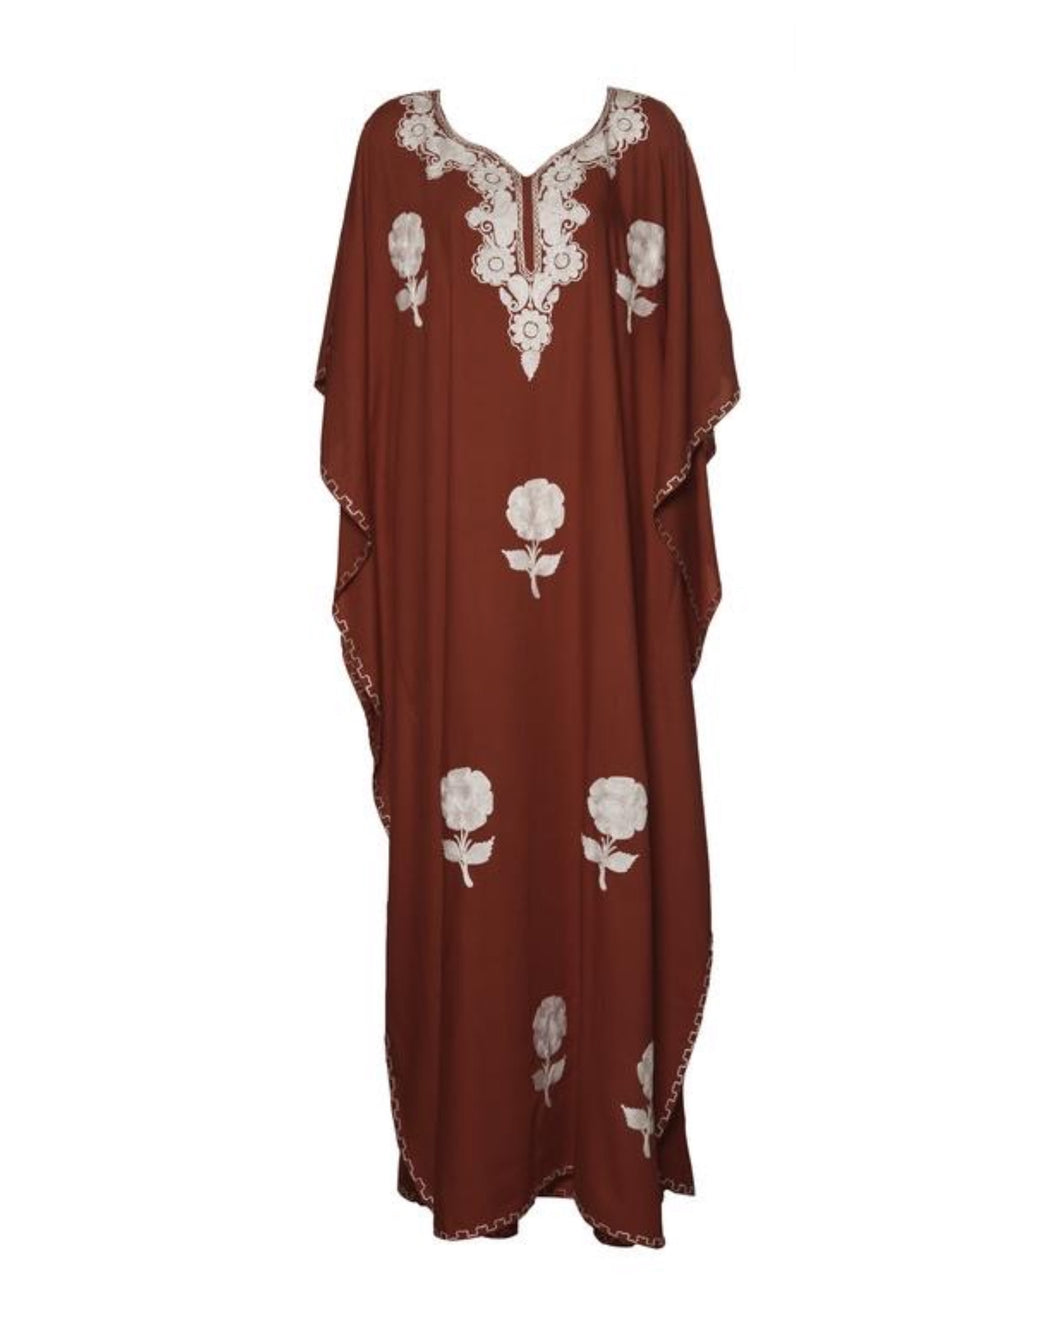 Kaftan Dress (Red with White Flowers)